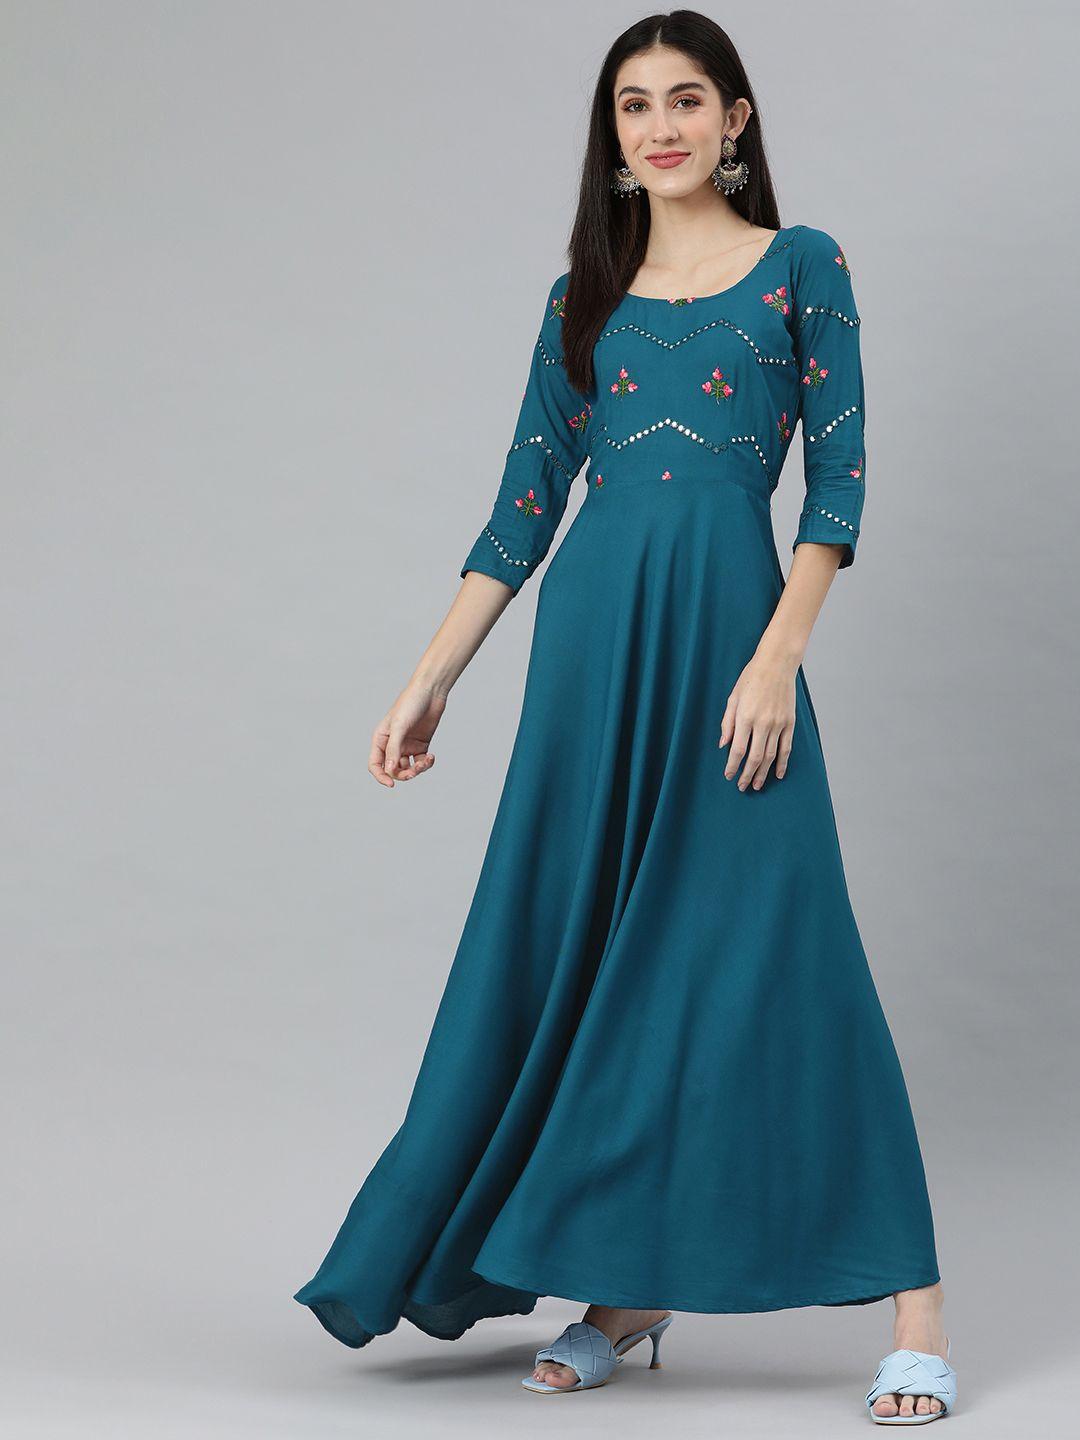 swishchick teal blue solid ethnic maxi dress with embroidered detail